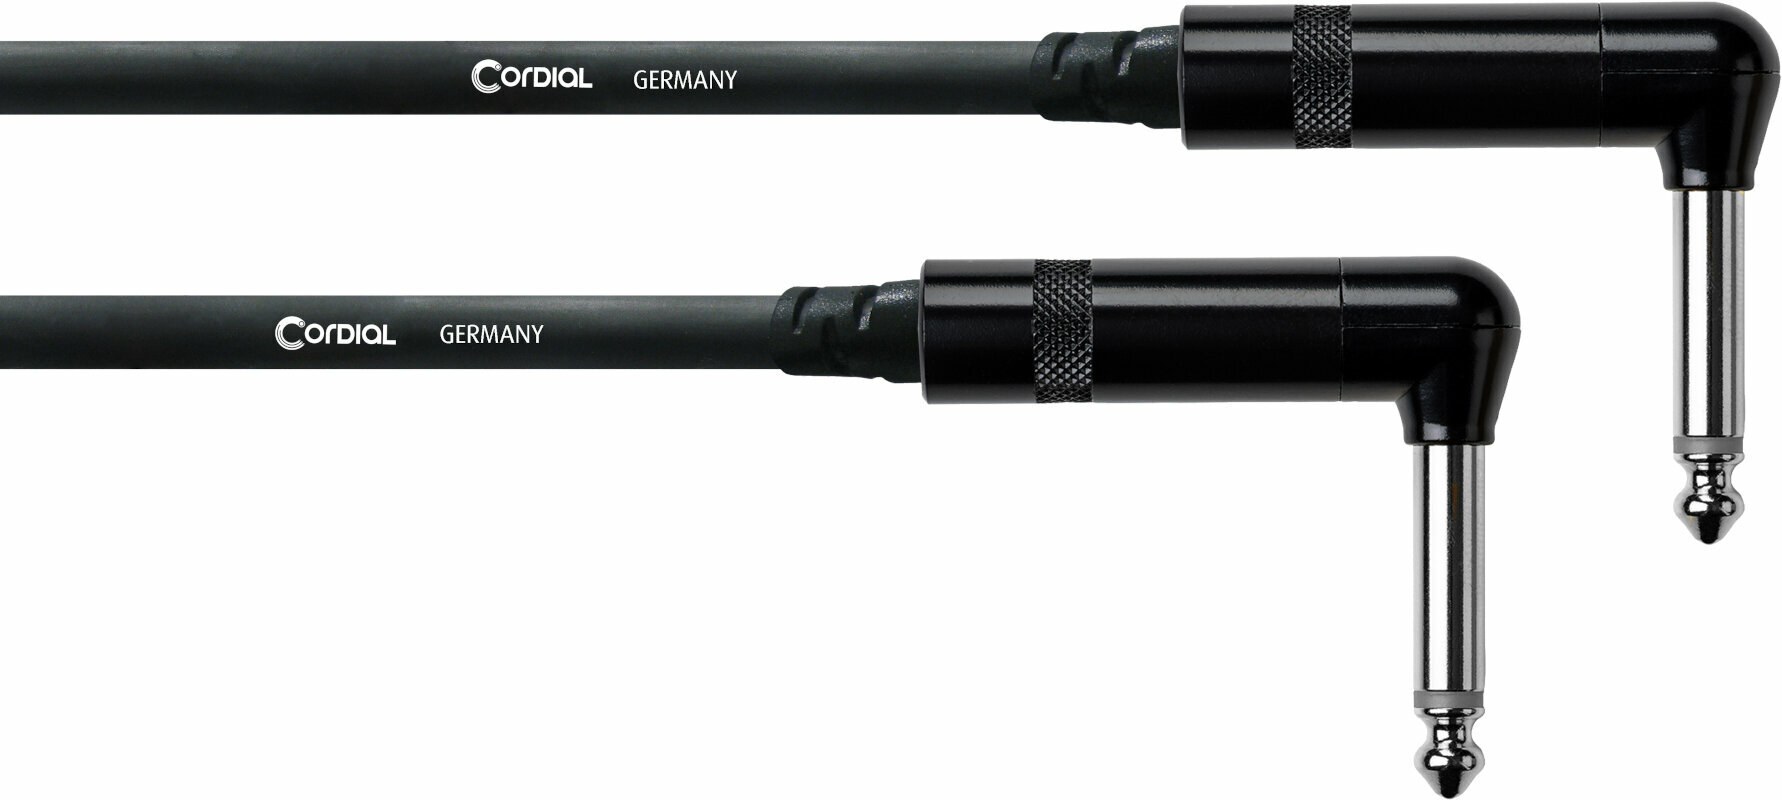 Instrument Cable Cordial CFI 6 RR Black 6 m Angled - Angled